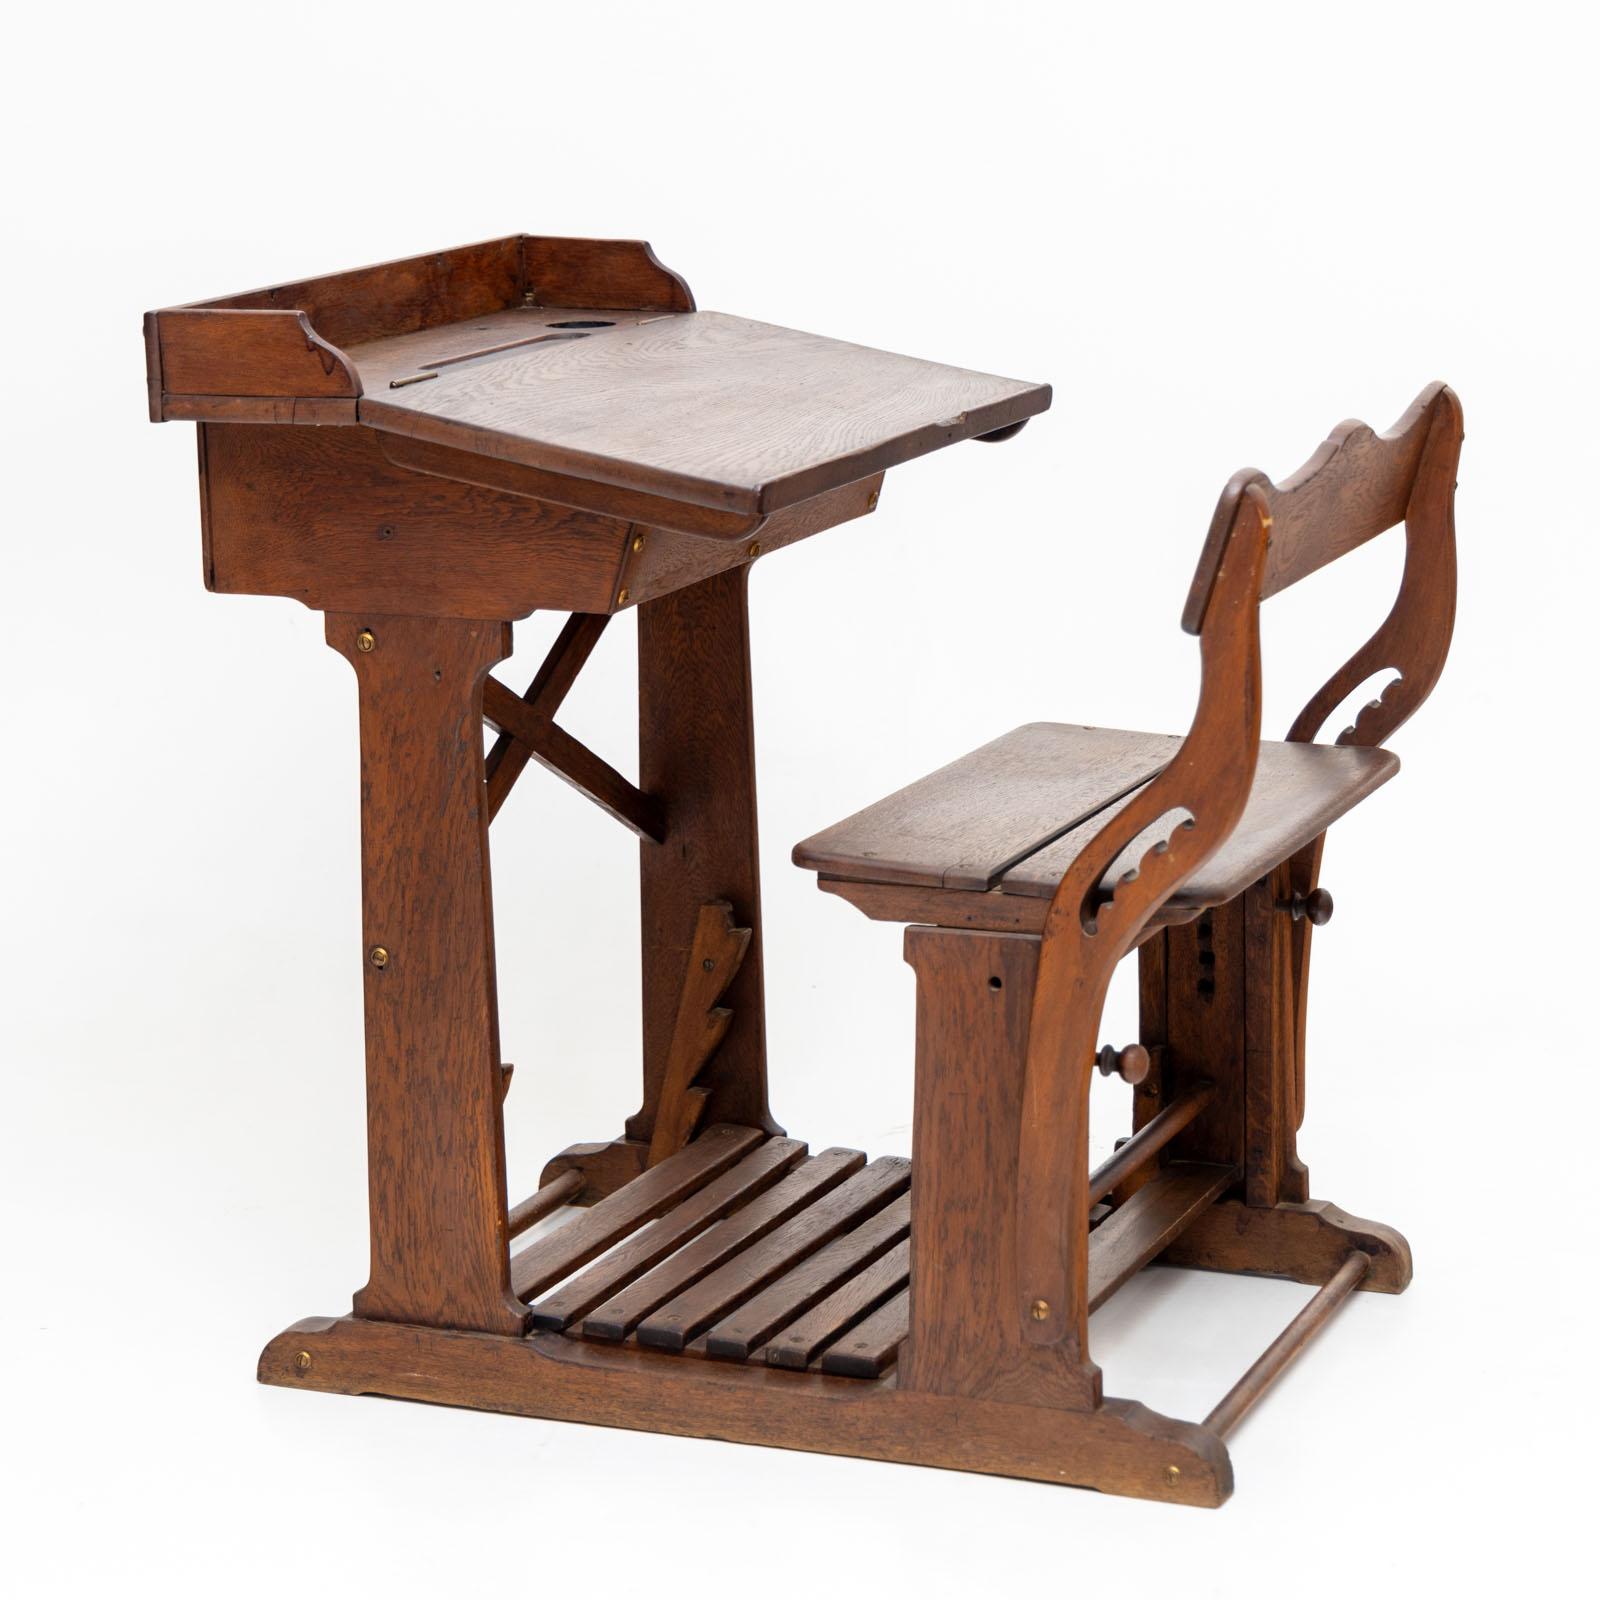 Vintage wooden school desk featuring a hinged writing surface equipped with a recessed holder for pens and inkwell. The school bench is thoughtfully designed with adjustable slats at the bottom for a comfortable footrest, and its height is also